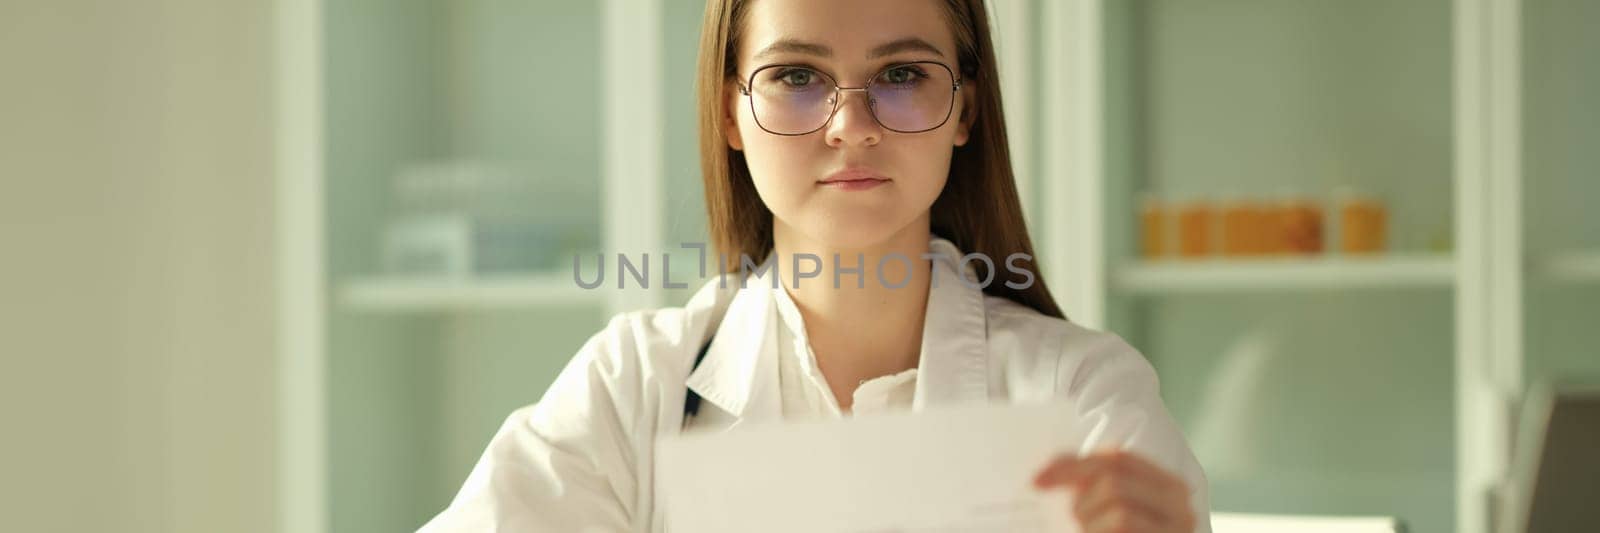 Doctor cardiologist examining patient cardiogram on paper in clinic. Diagnosis of heart disease concept